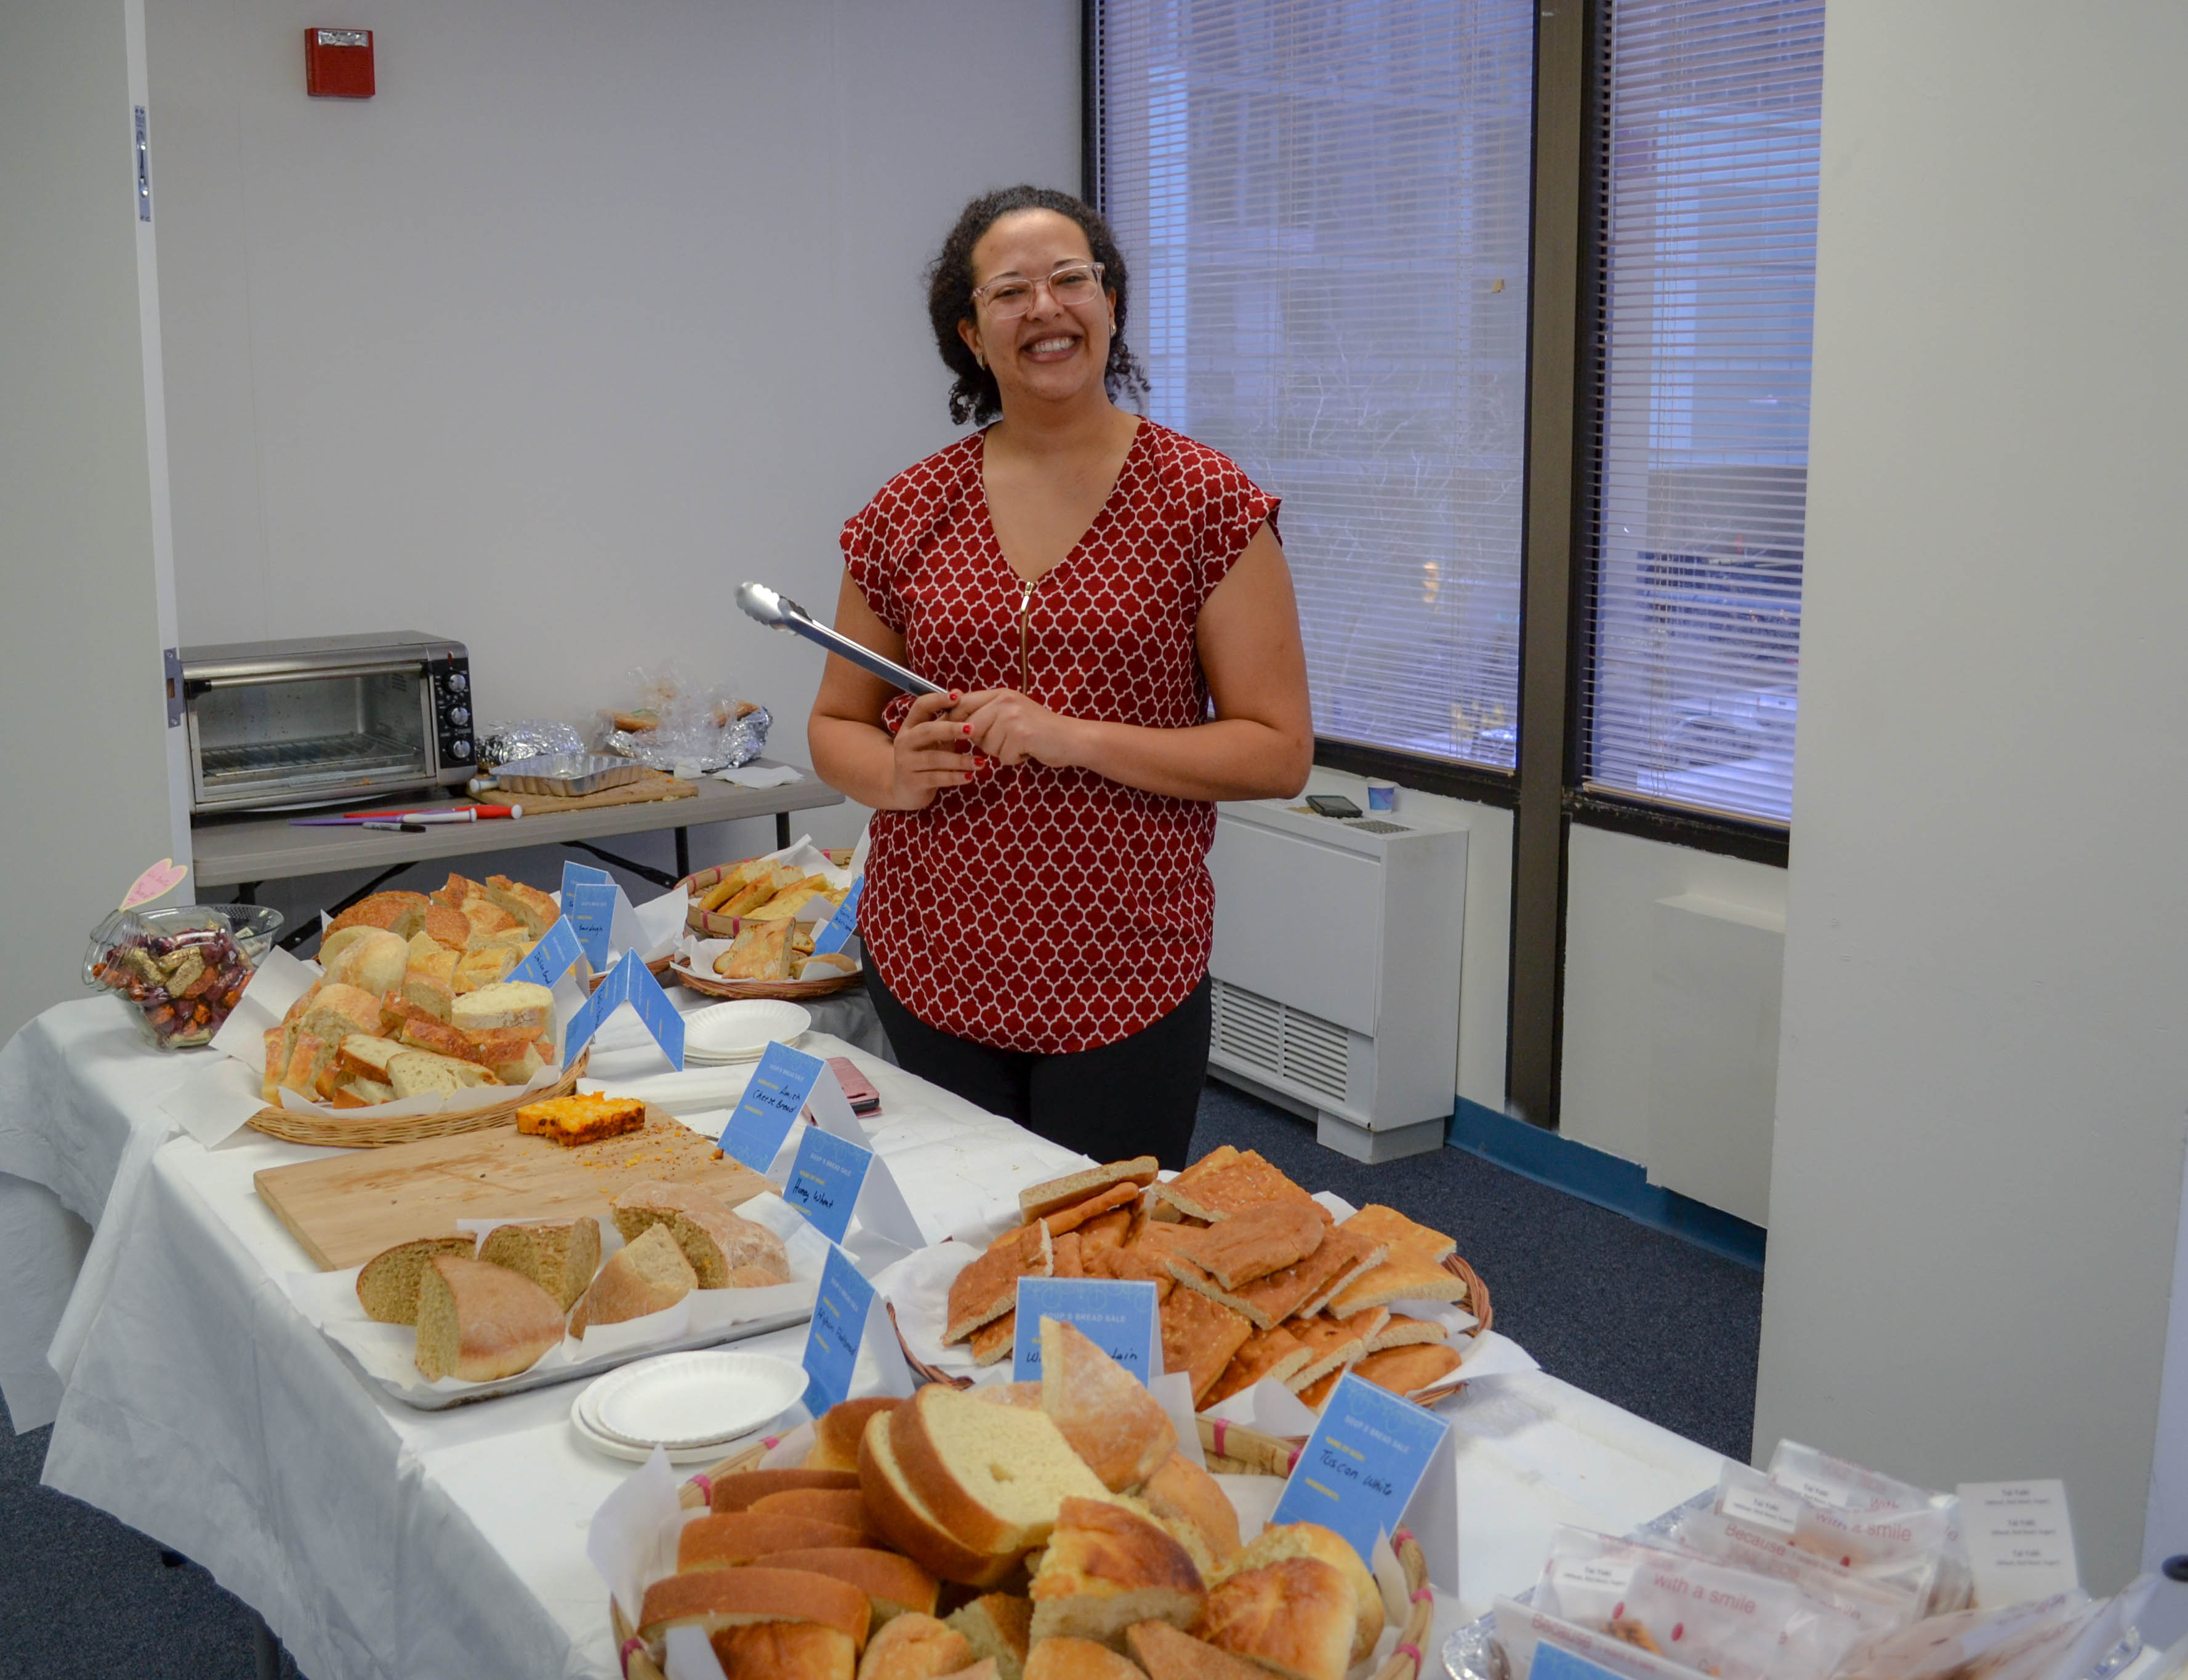 Diplomatic Language Services staff member serves bread to raise money for The National Multiple Sclerosis Society